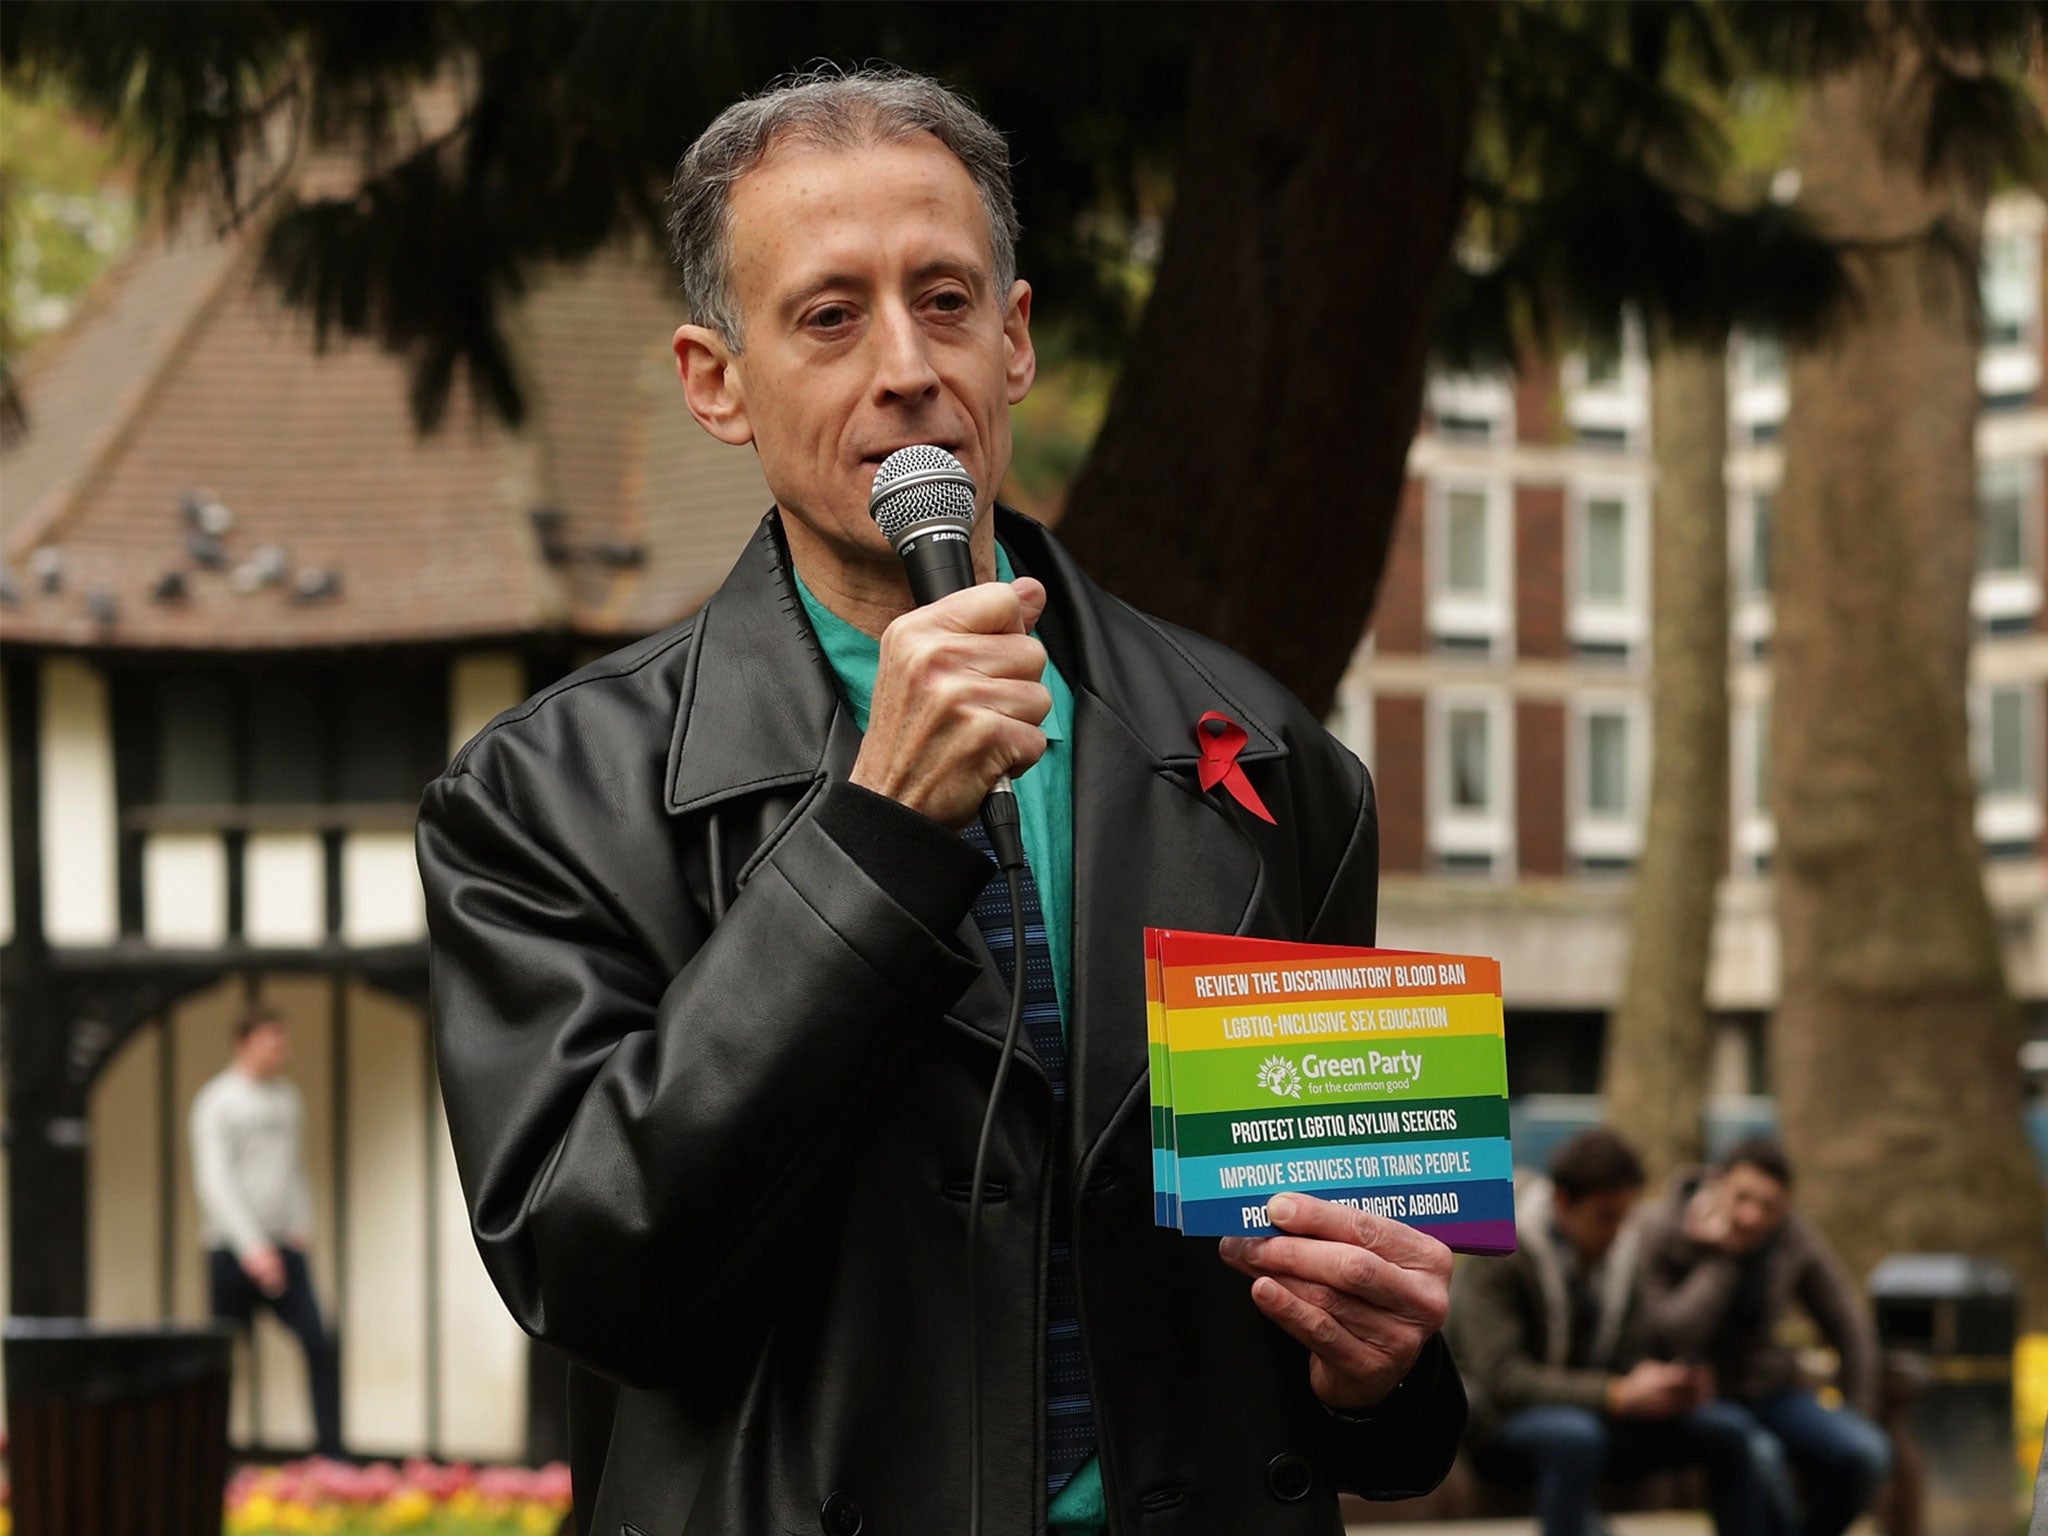 Peter Tatchell, pictured speaking at a Green Party rally, says bigots should be challenged